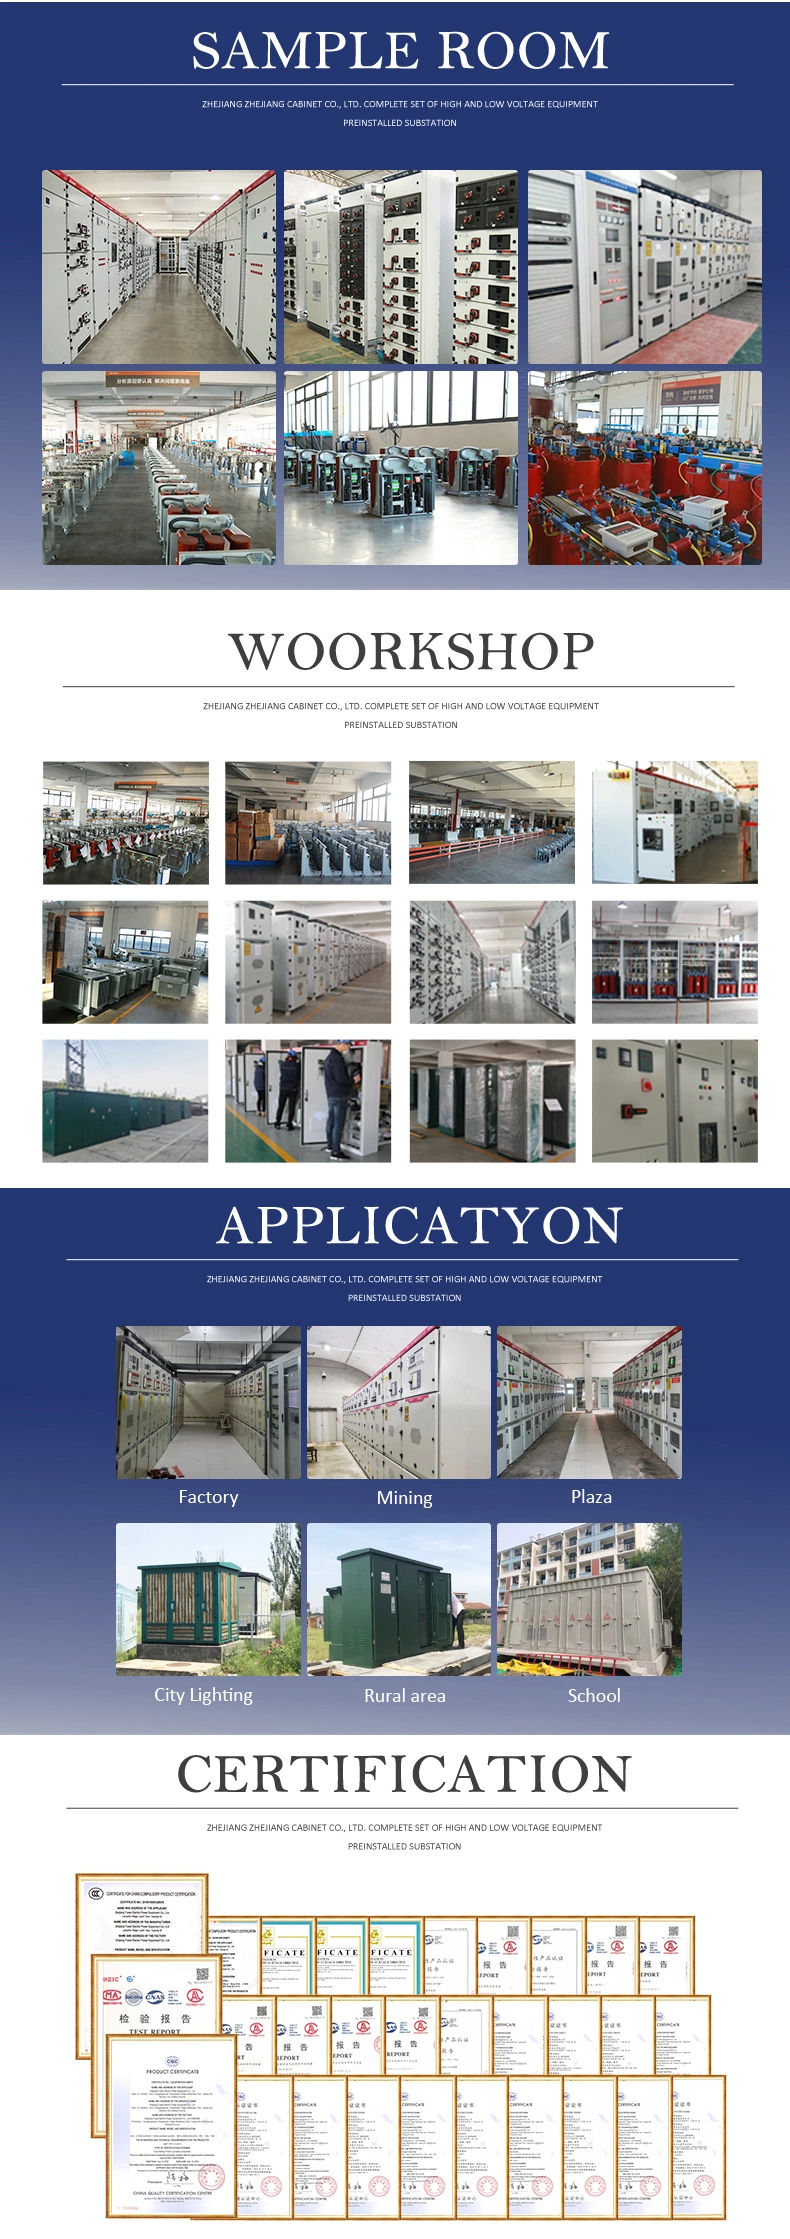 Customized 11kv 13.8kv 24kv Medium Voltage Removable Metal-Clad Air Insulated Main Switchboard Panel